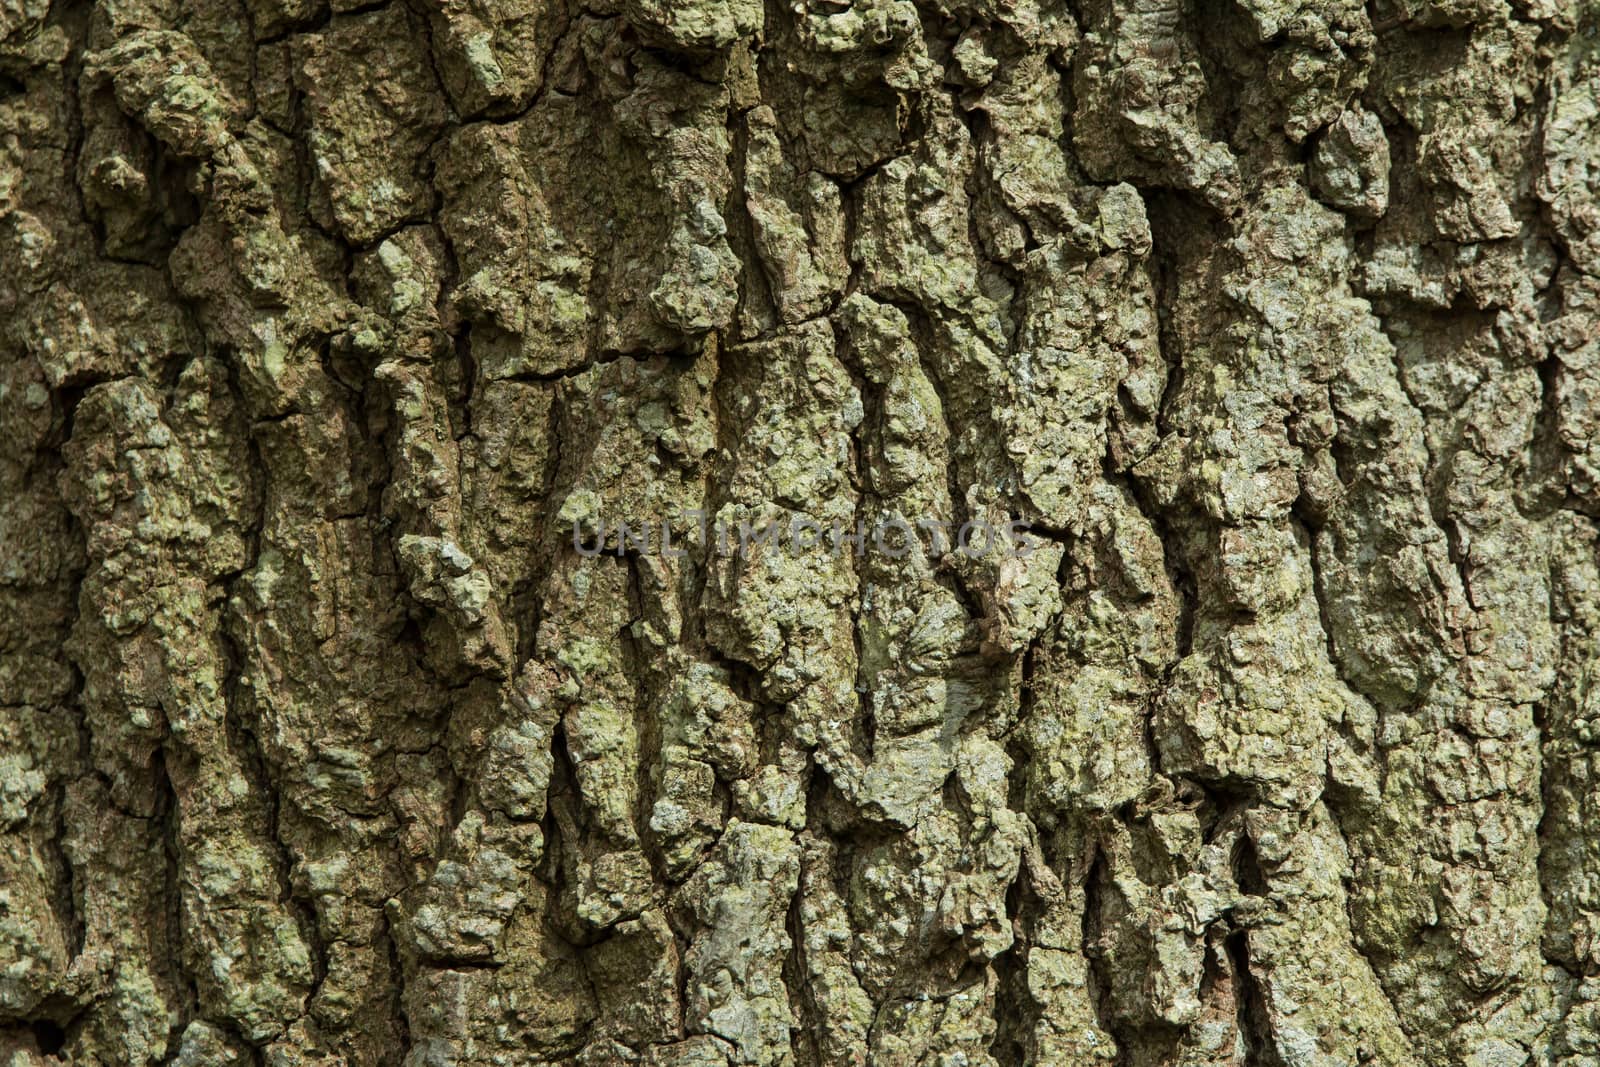 Deeply fissured bark of Oak Tree in English woodland